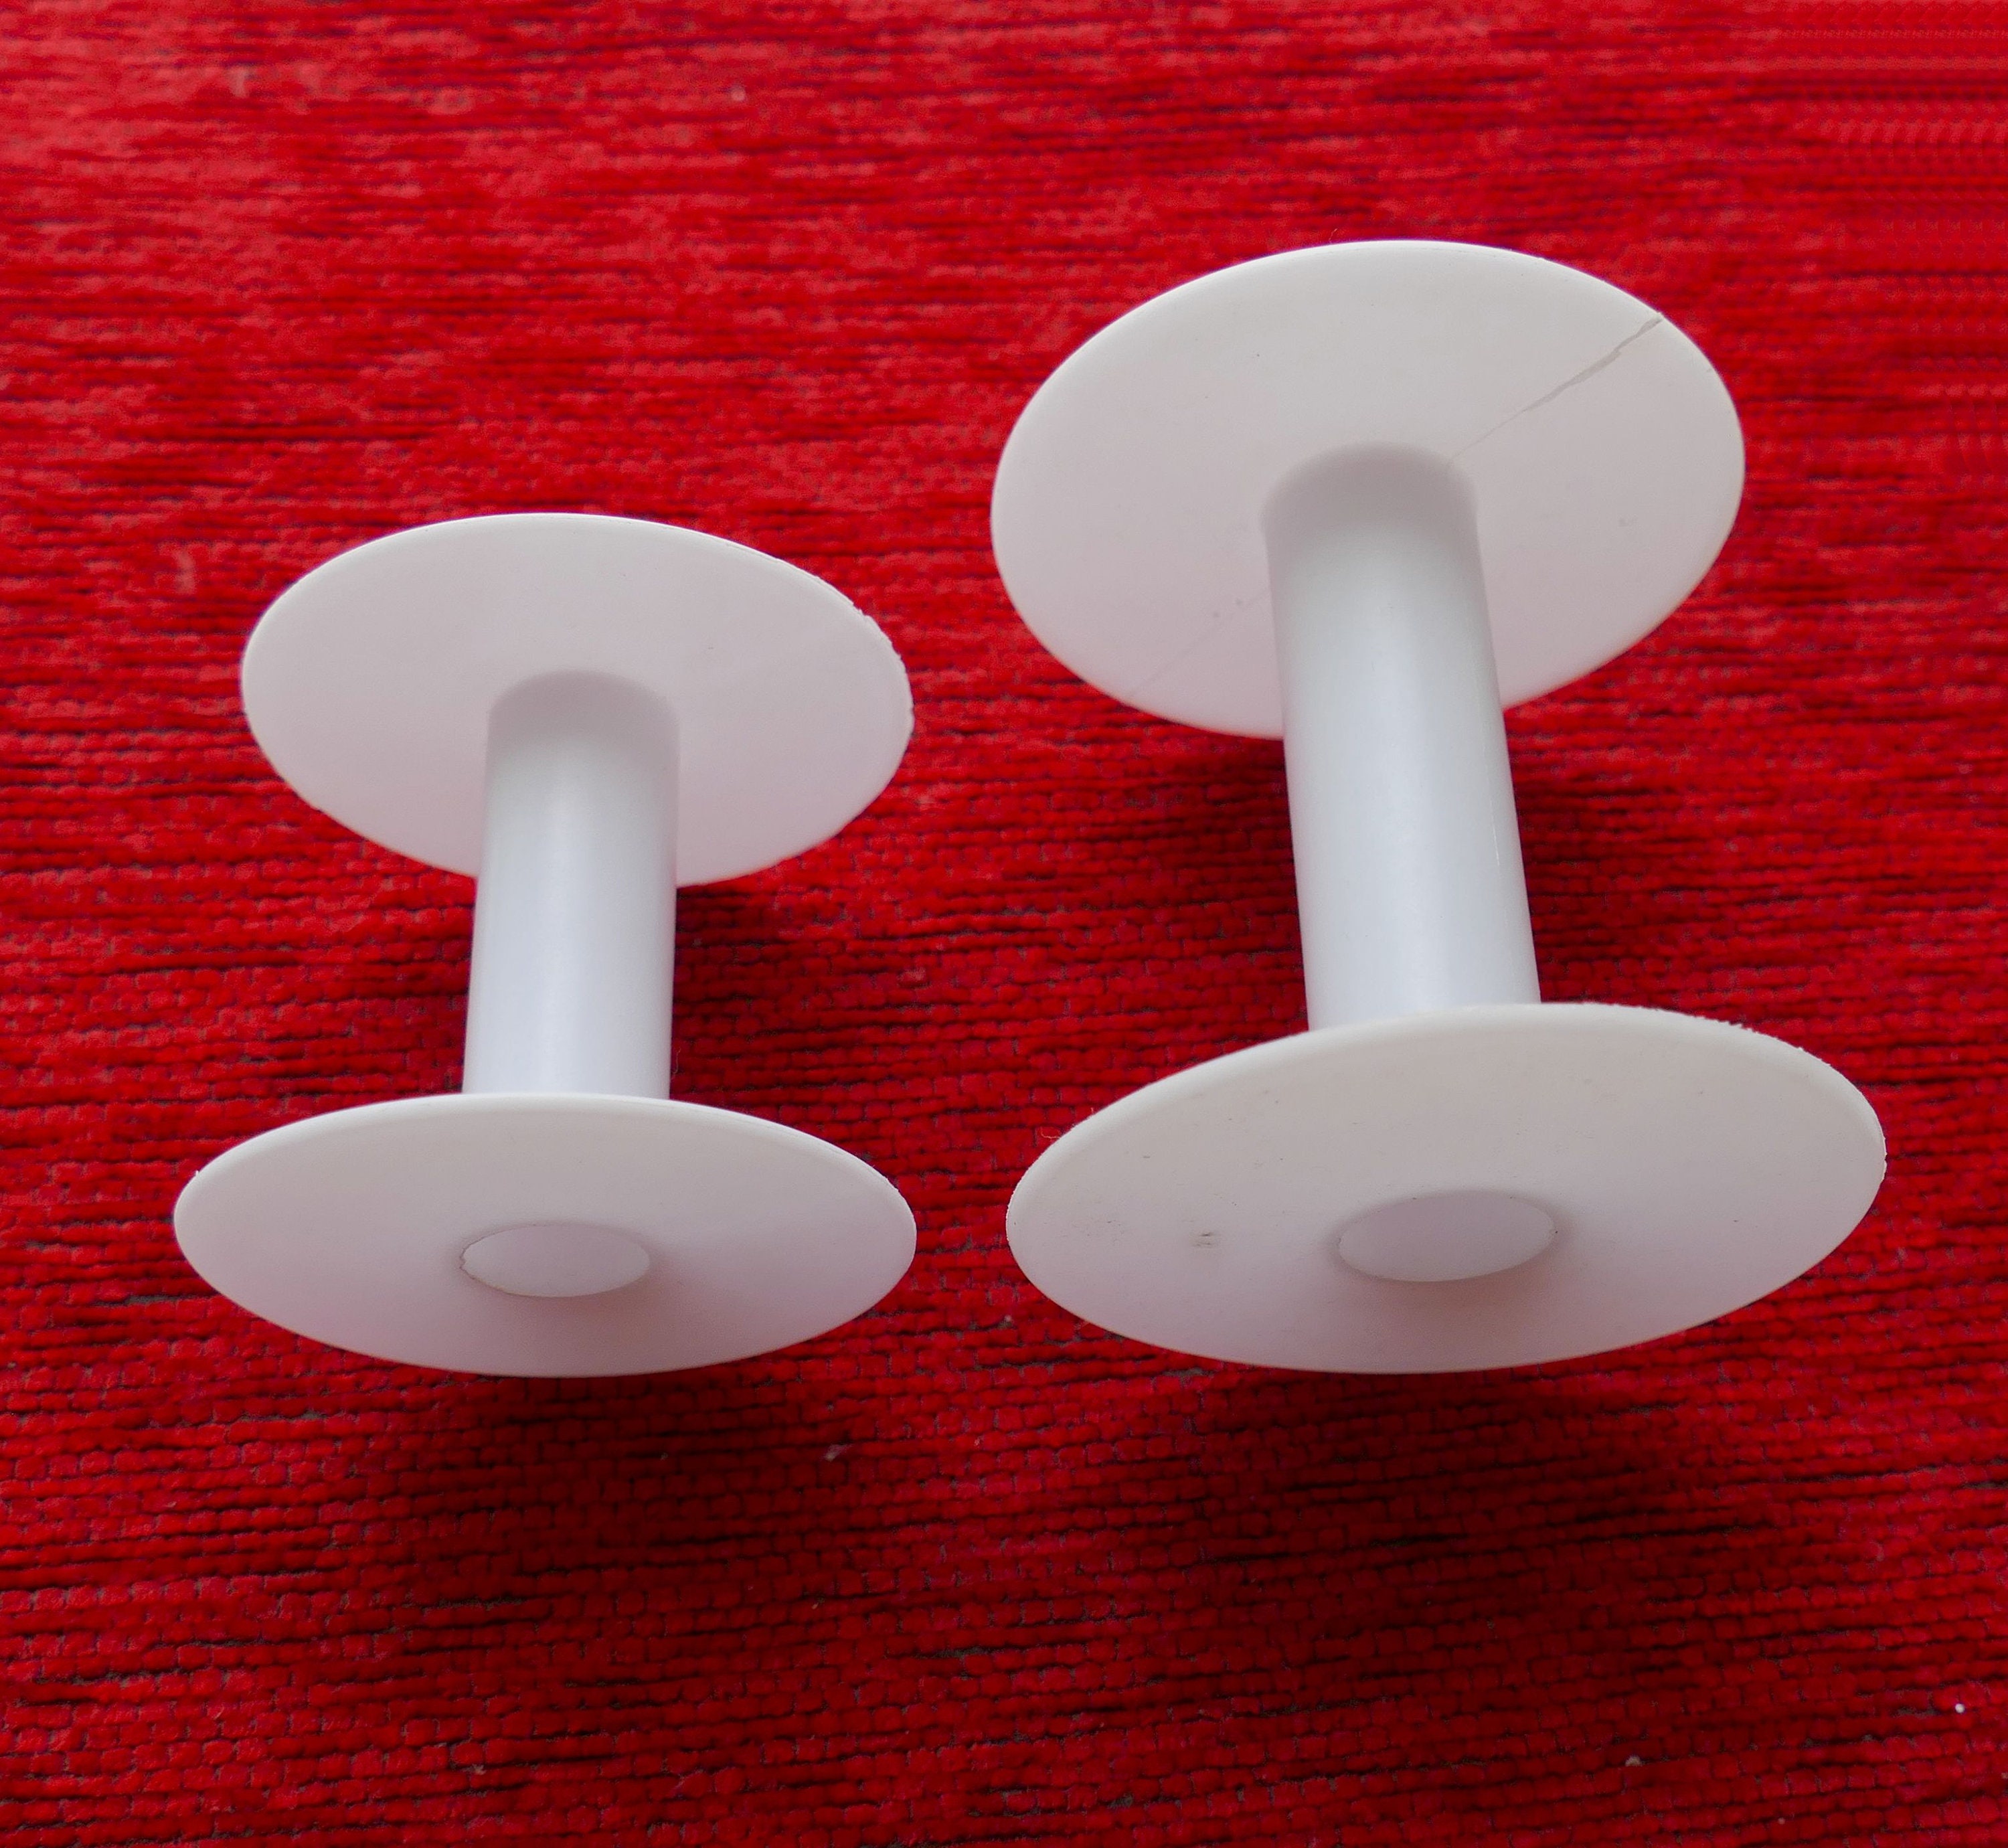 CleverDelights cleverdelights 3.75 white plastic spools - 40 pack